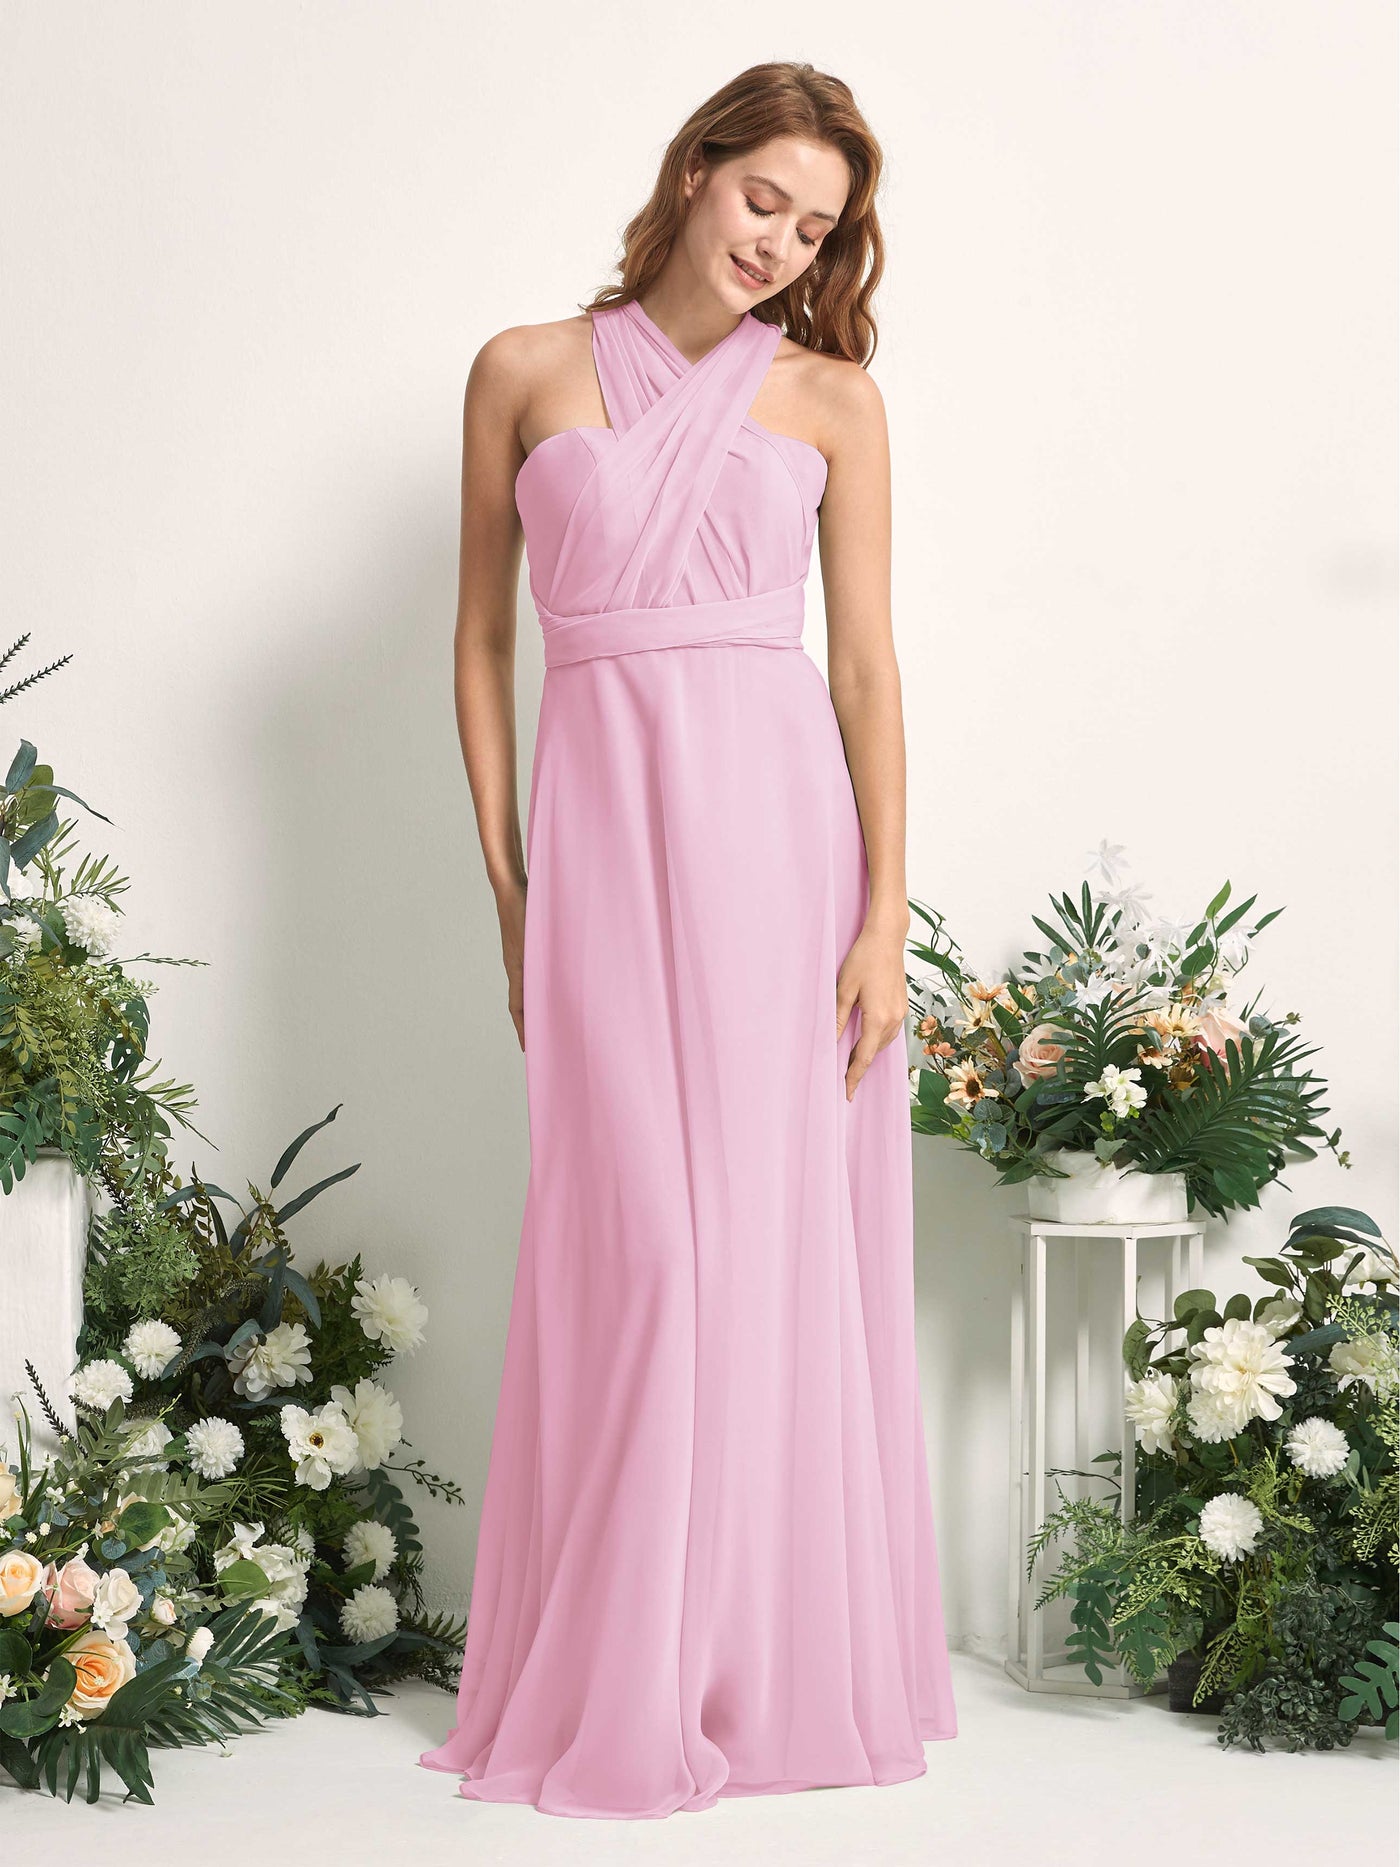 Candy Pink Bridesmaid Dresses Bridesmaid Dress A-line Chiffon Halter Full Length Short Sleeves Wedding Party Dress (81226339)#color_candy-pink